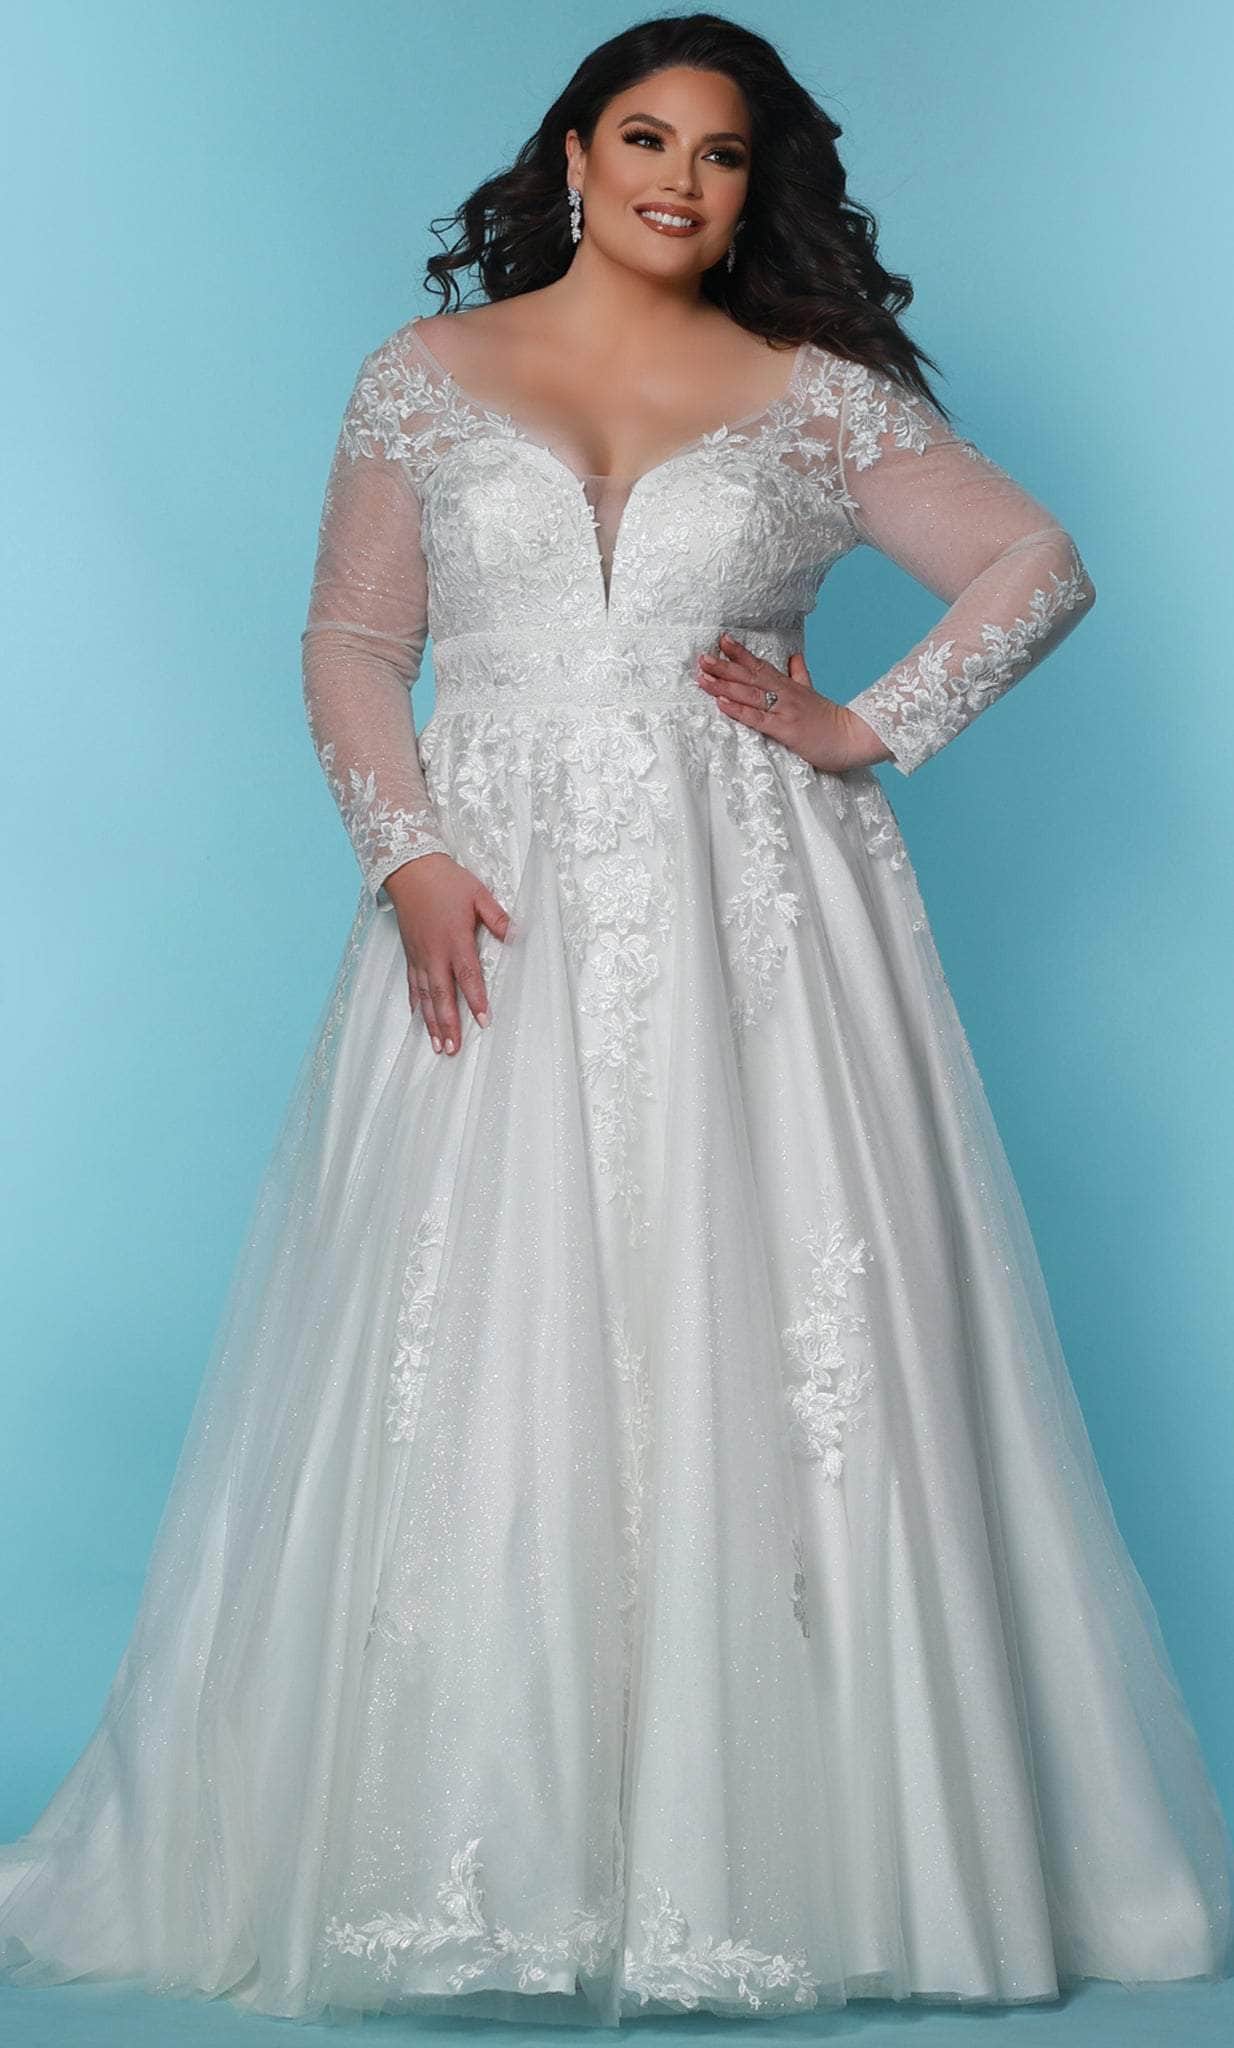 Image of Sydney's Closet Bridal SC5282 - Glittered A-line Bridal Gown